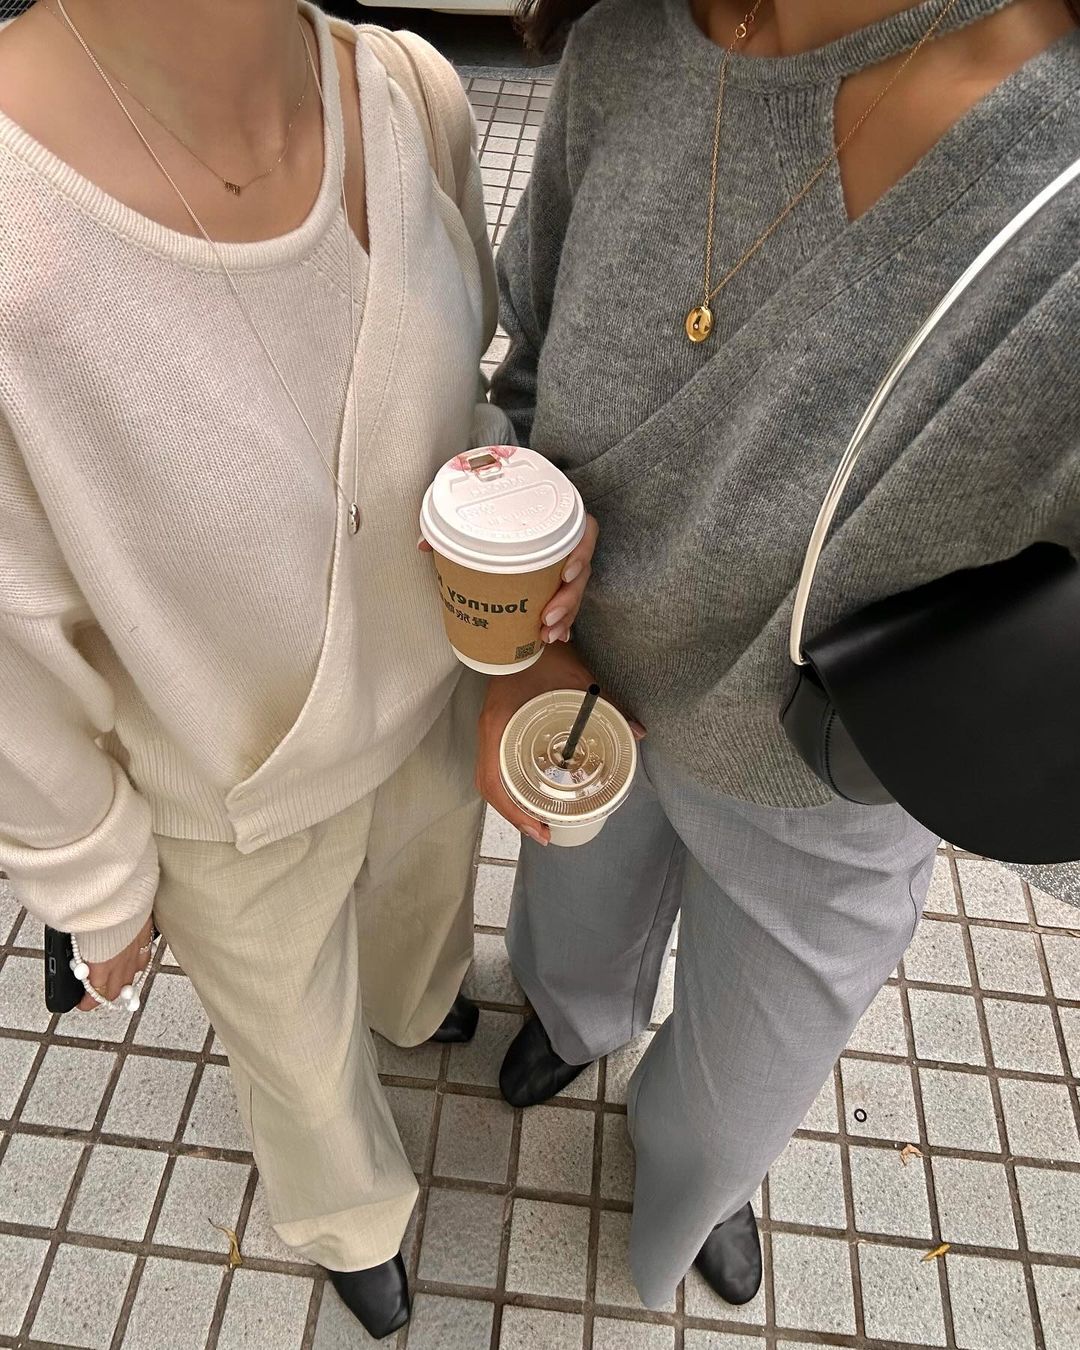 Winter Trouser Trends: @michellelin.lin and a friend wear tailored trousers and matching jumpers